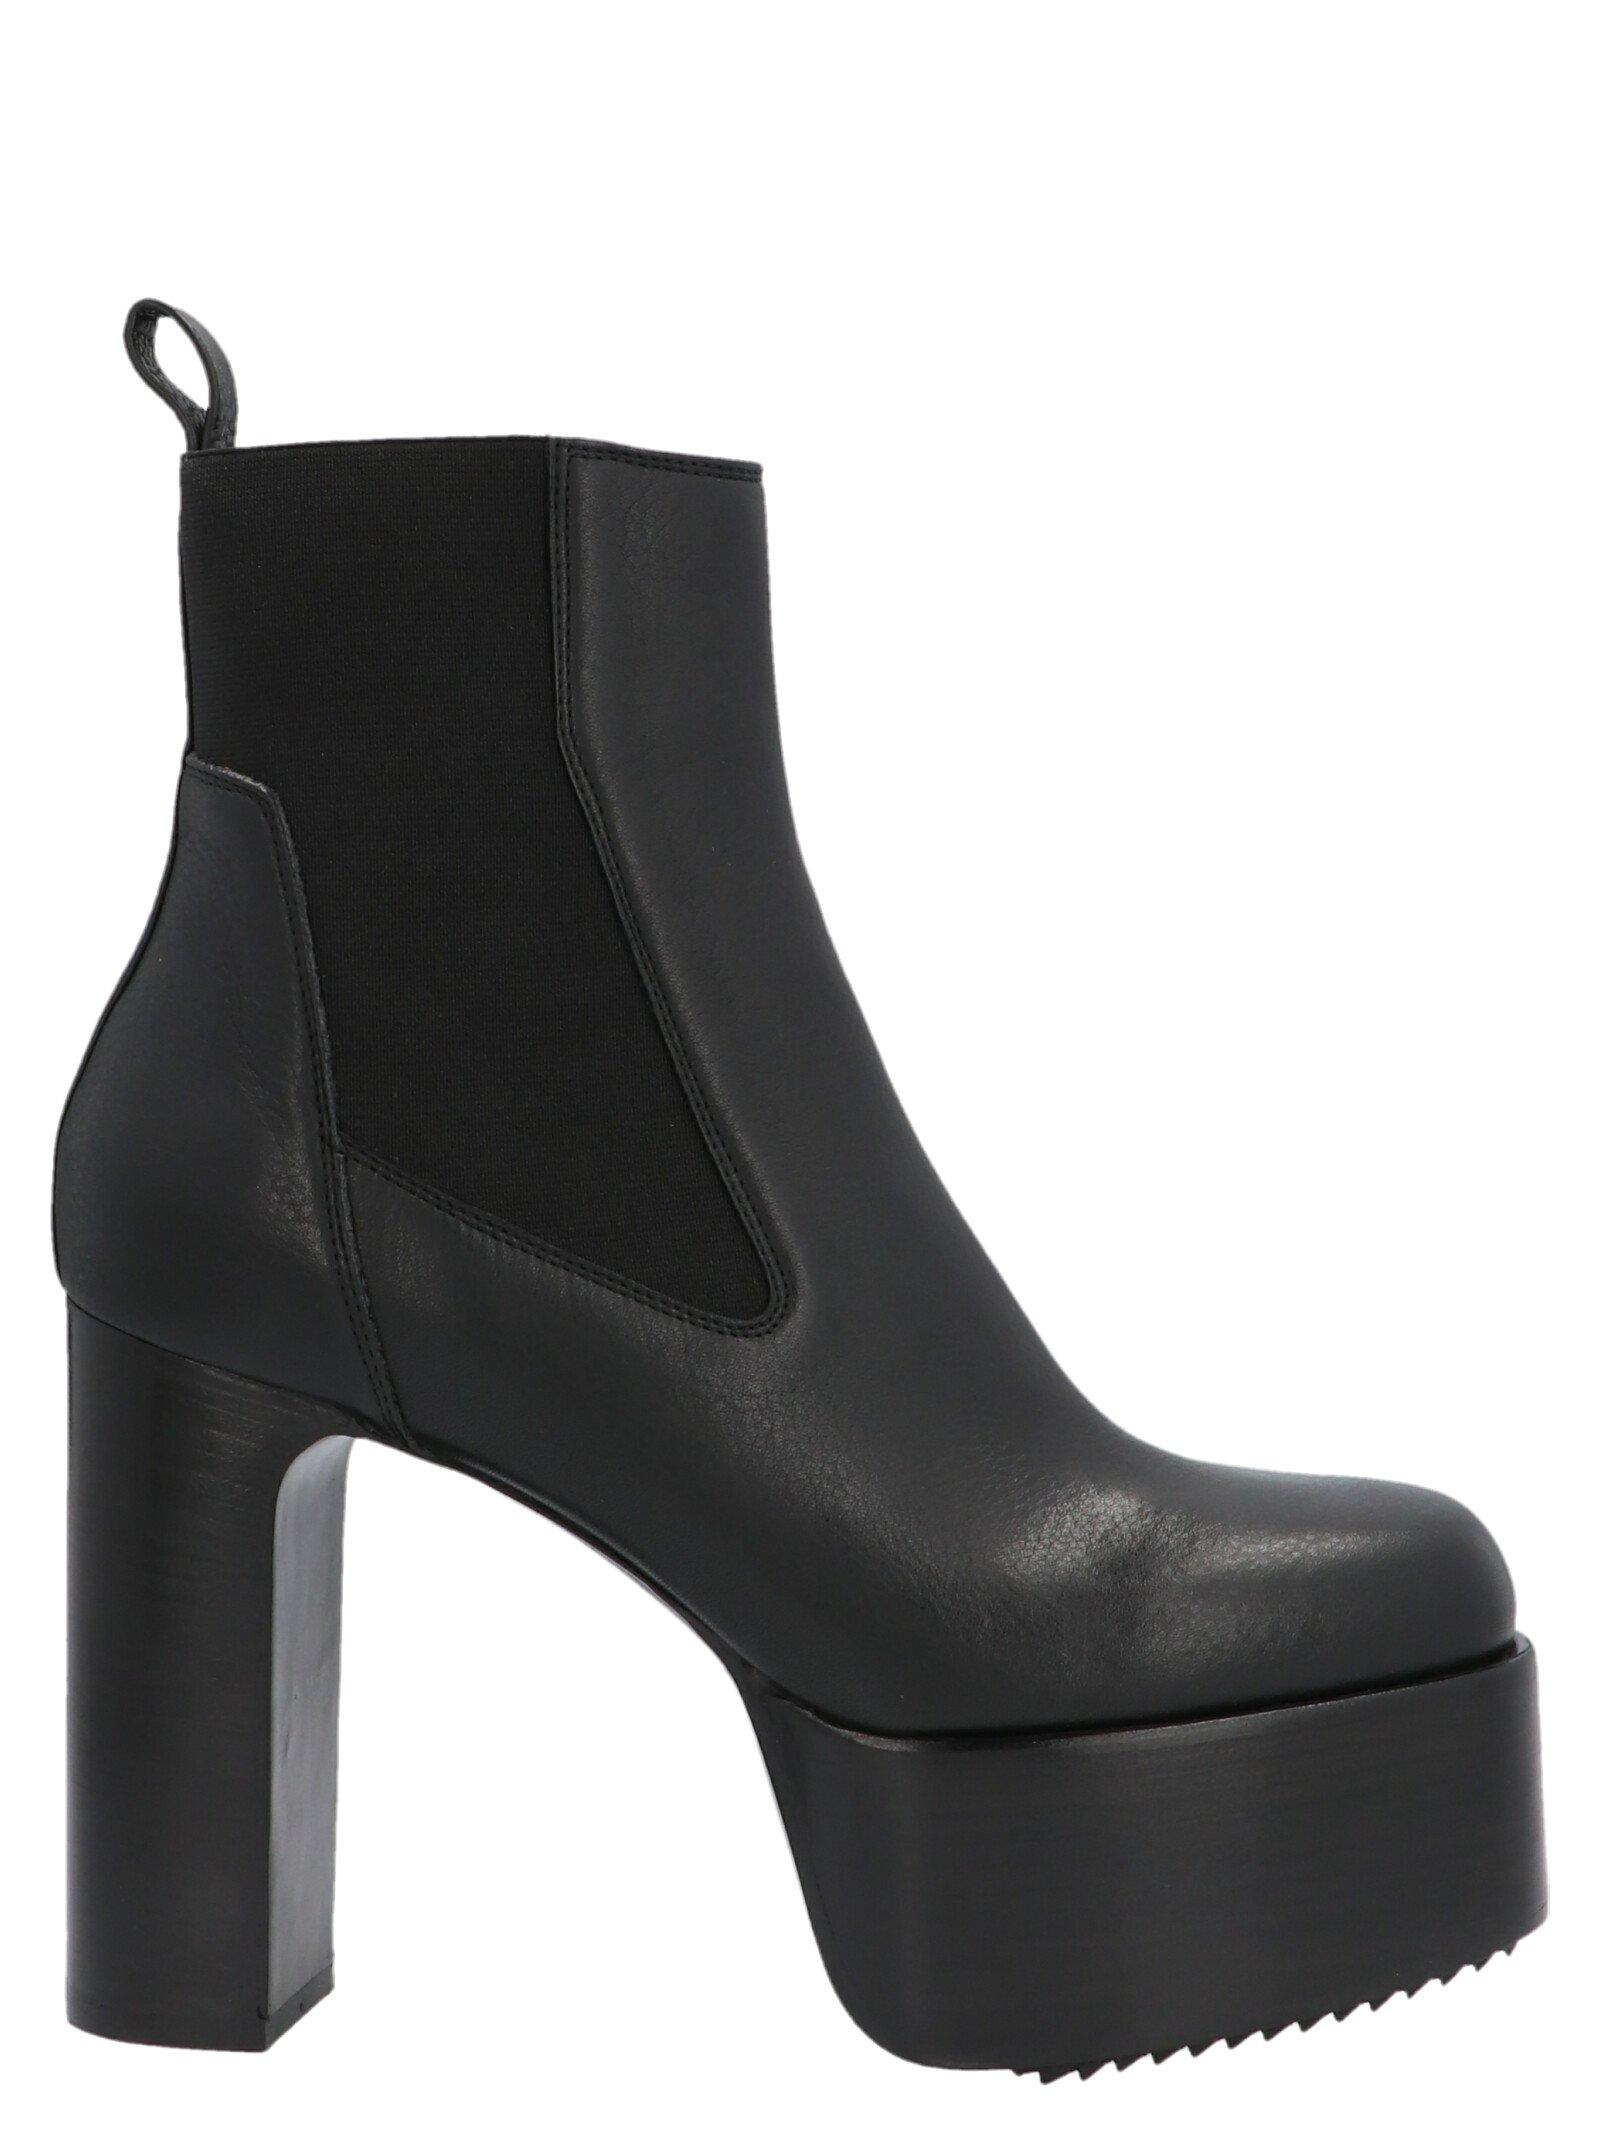 Rick Owens Leather Kiss Ankle Boots in Black - Lyst